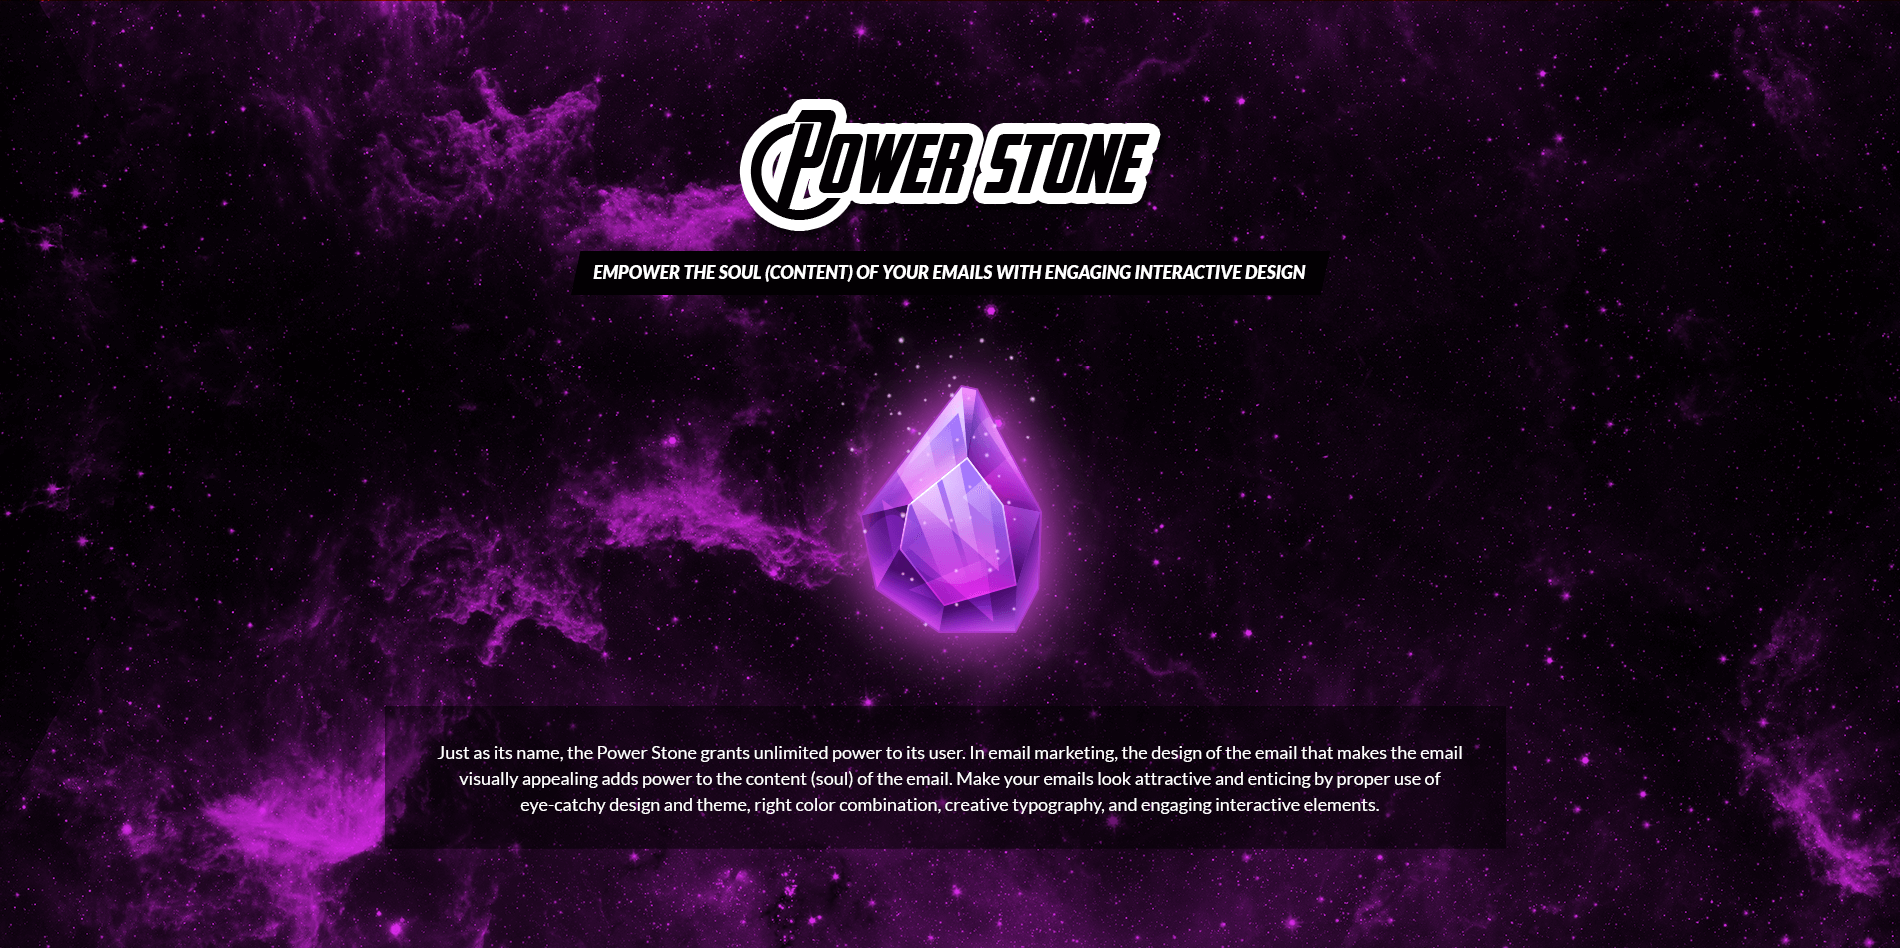 Power Stone - Empower the Soul (Content) of your Emails with Engaging Interactive Design
Just as its name, the Power Stone grants unlimited power to its user. In email marketing, the design of the email that makes the email visually appealing adds power to the content (soul) of the email. Make your emails look attractive and enticing by proper use of eye-catchy design and theme, right color combination, creative typography, and engaging interactive elements.
